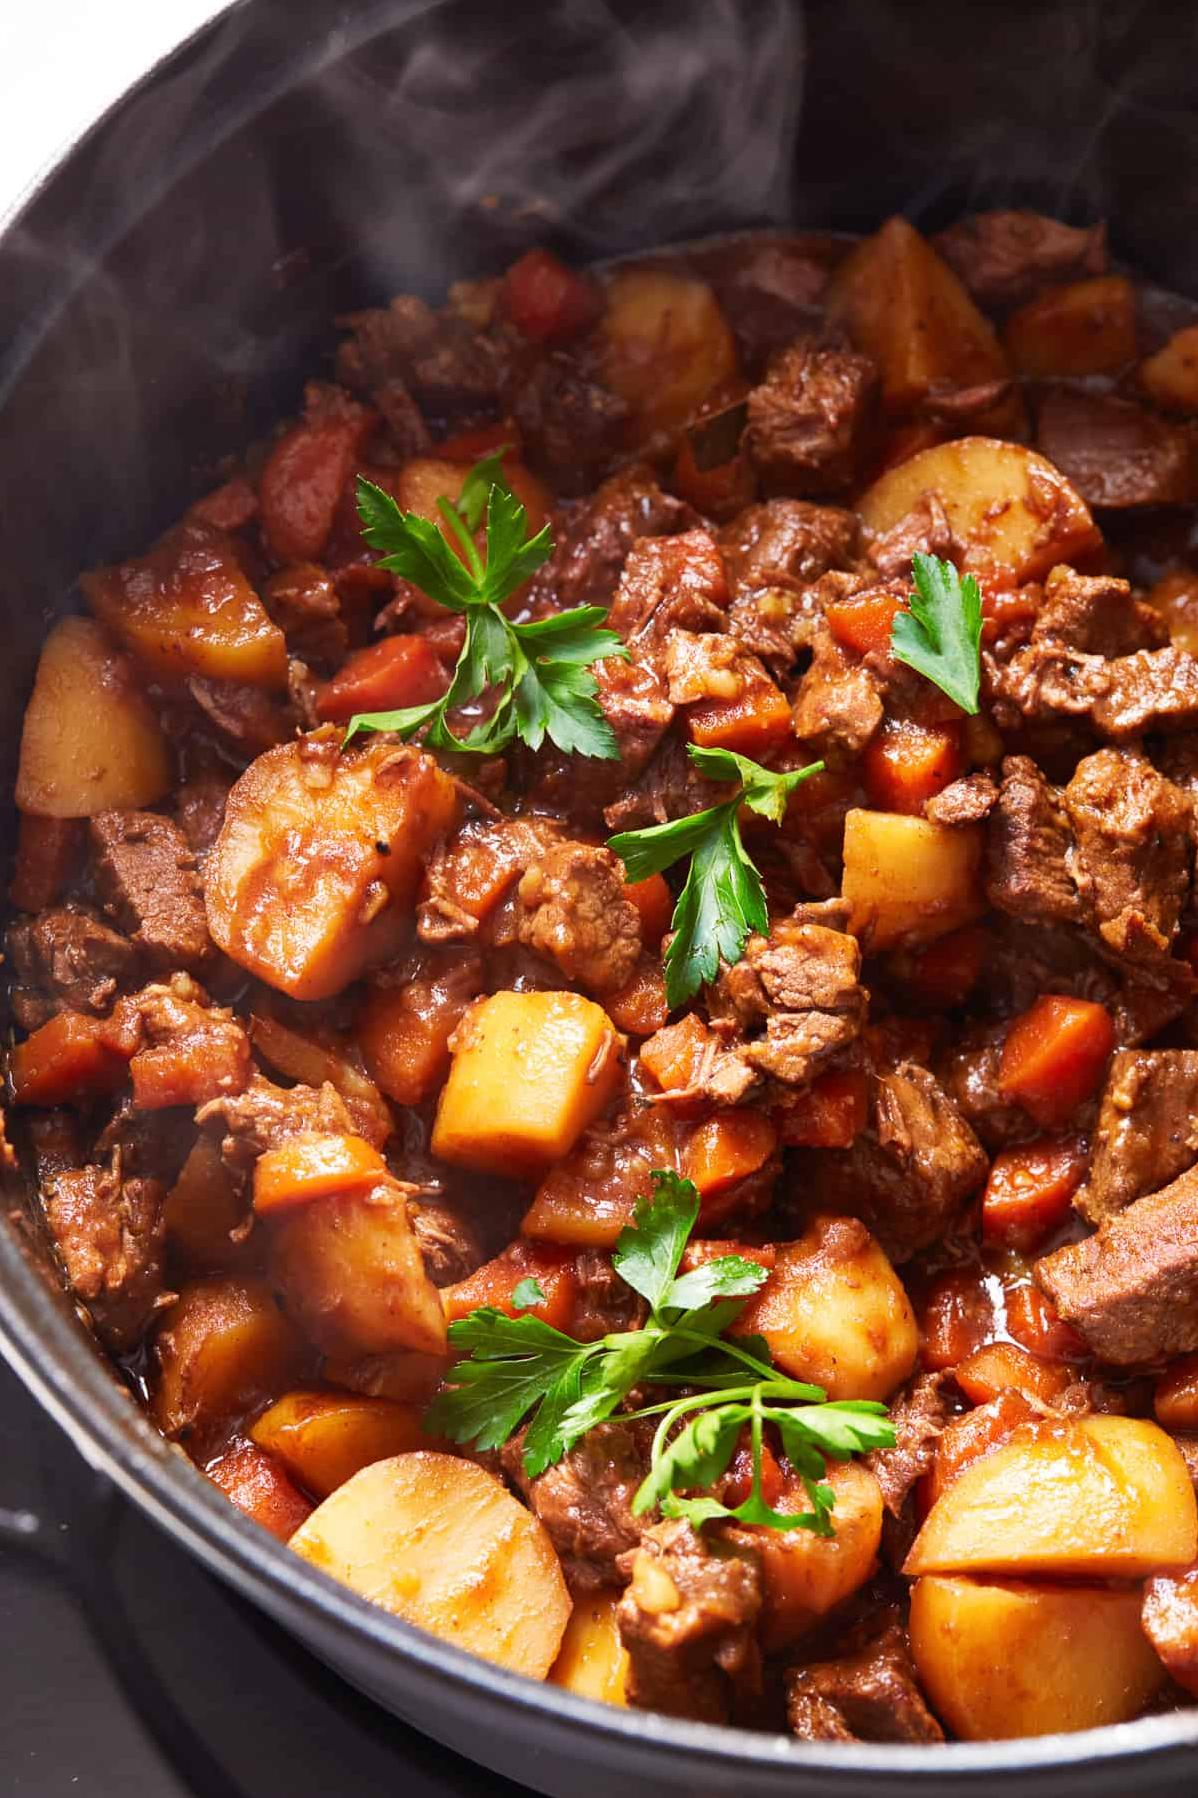  Gather around the table with friends and family to savor each bite of this warming stew.